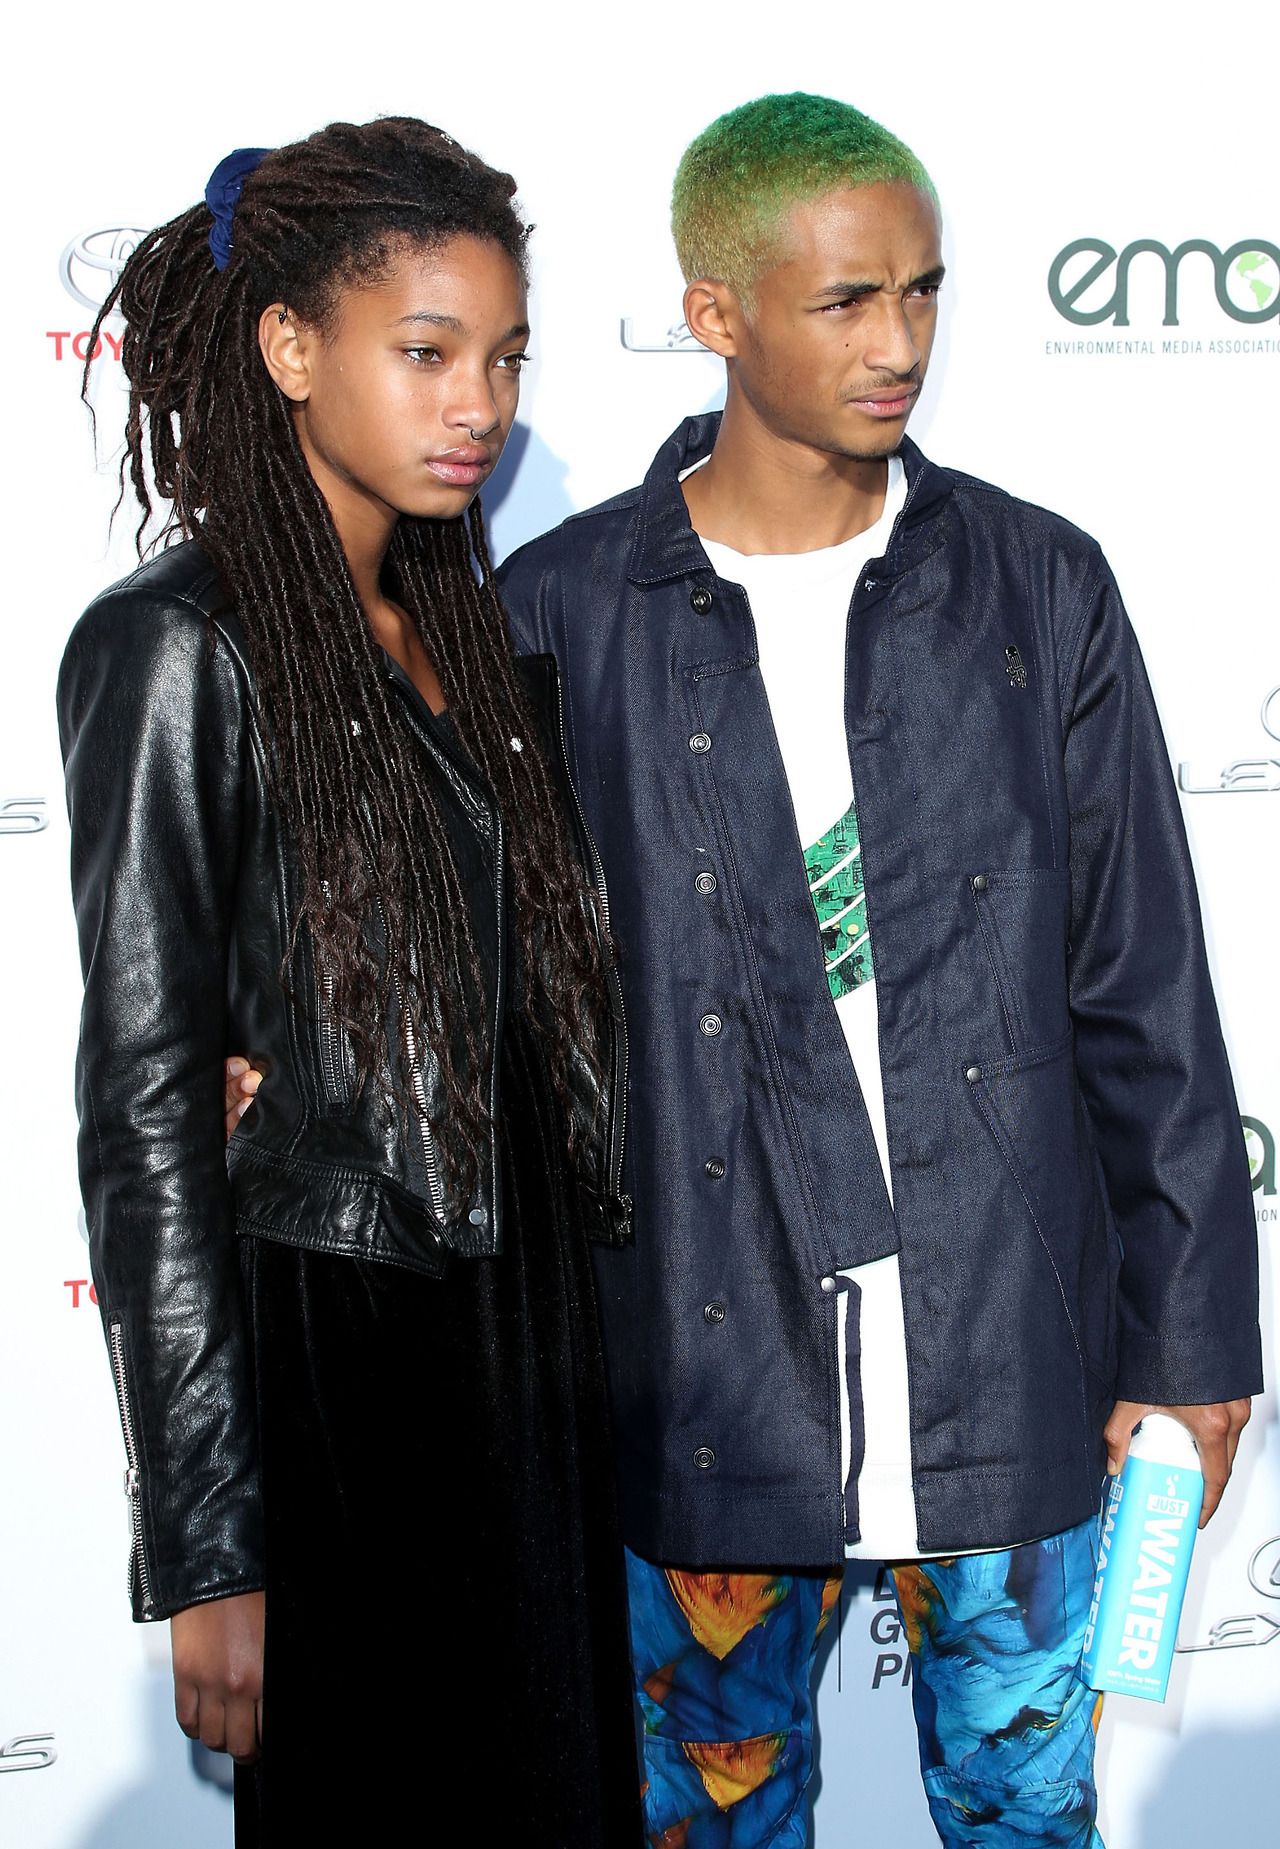 Siblings Jaden and Willow Smith